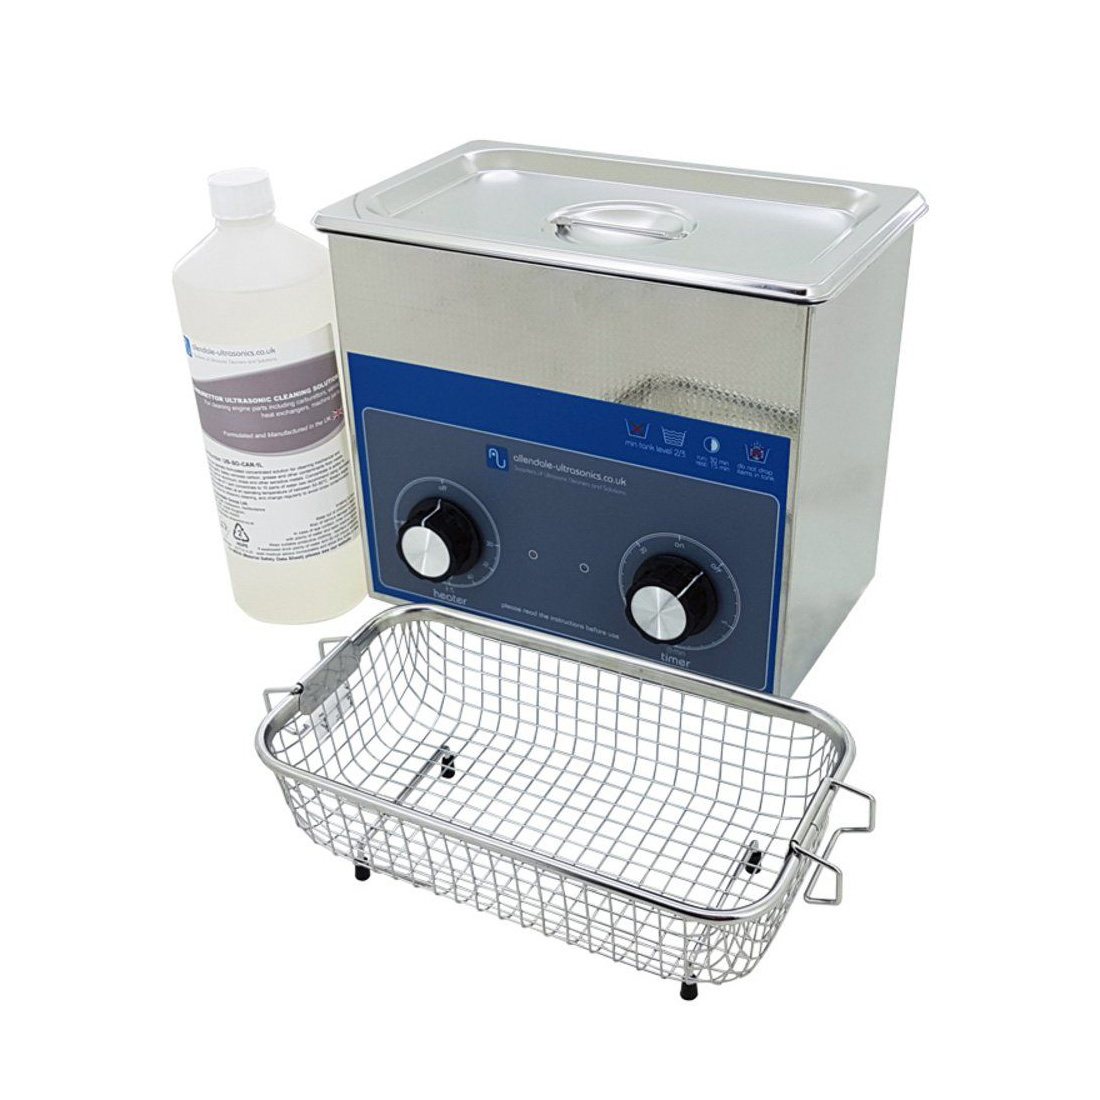 DT175 USA (Twinshock) Ultrasonic Cleaner & Carb Cleaning Fluid Kit - 3 Litre - Allendale Ultrasonics